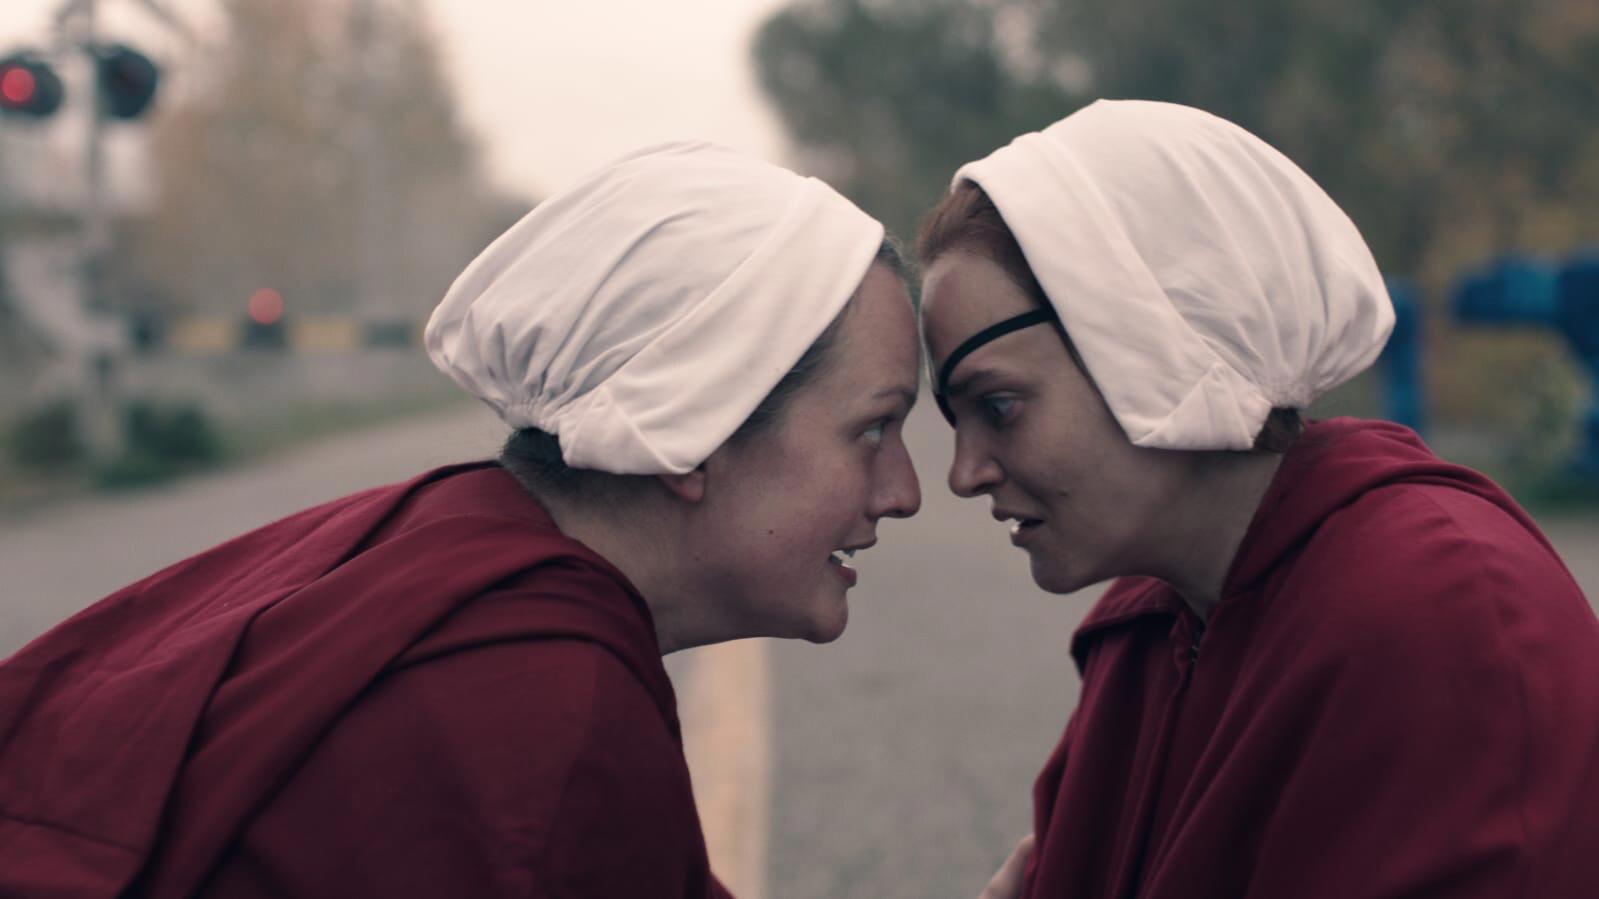 June and Janine touch foreheads in front of train tracks in 'The Handmaid's Tale'